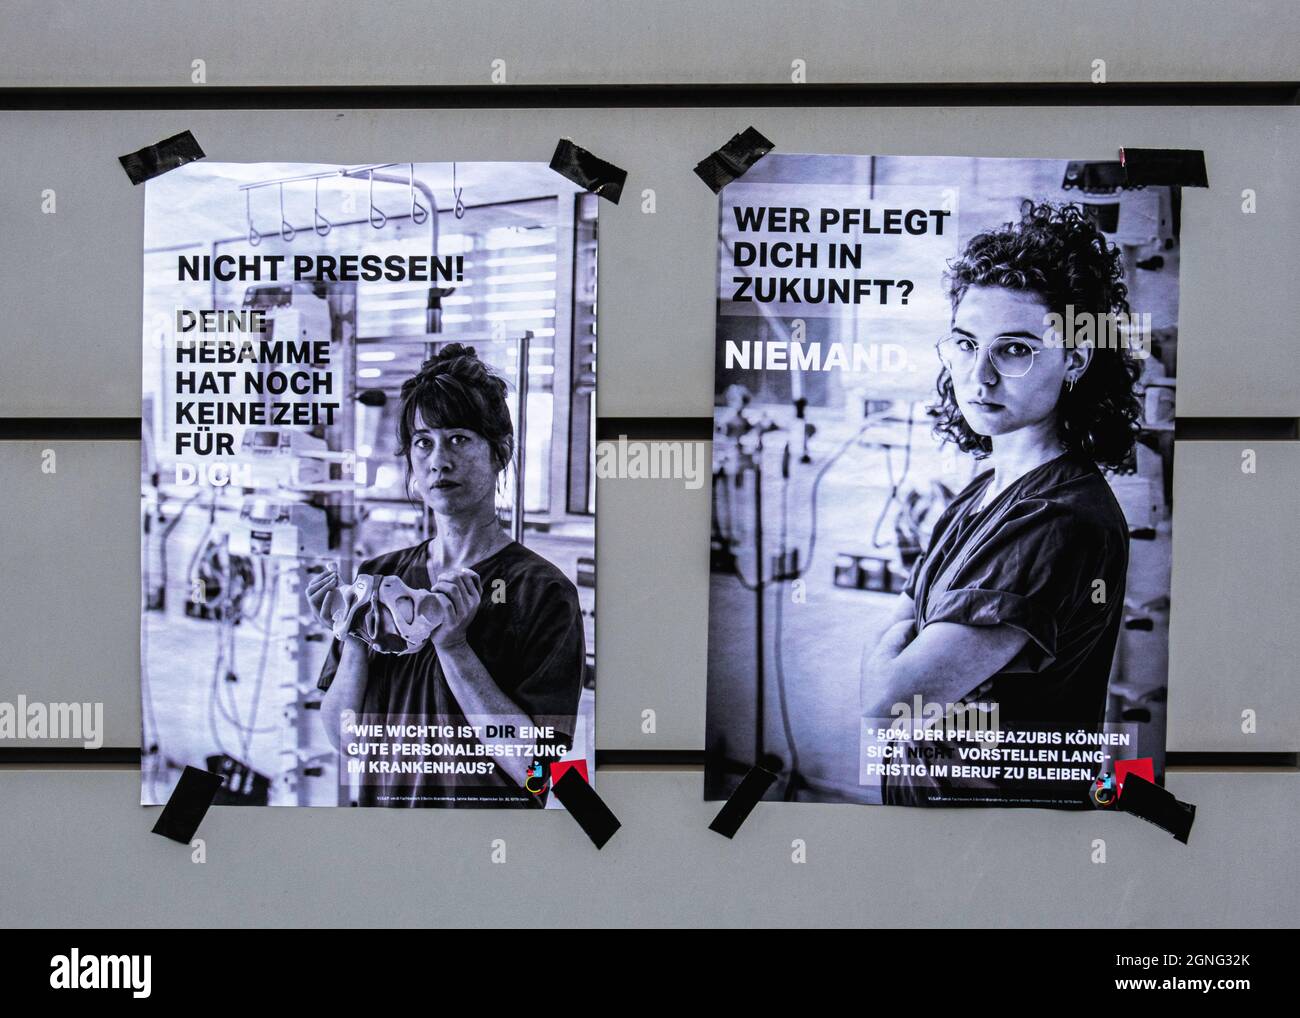 Germany, Berlin, Mitte, 23 September 2021. Nurses strike at Charite & Vivantes hospitals in Berlin. Protest posters on Charite high rise building in Luisenstrasse. Their union Verdi wants an improvementt he working conditions of members. Stock Photo